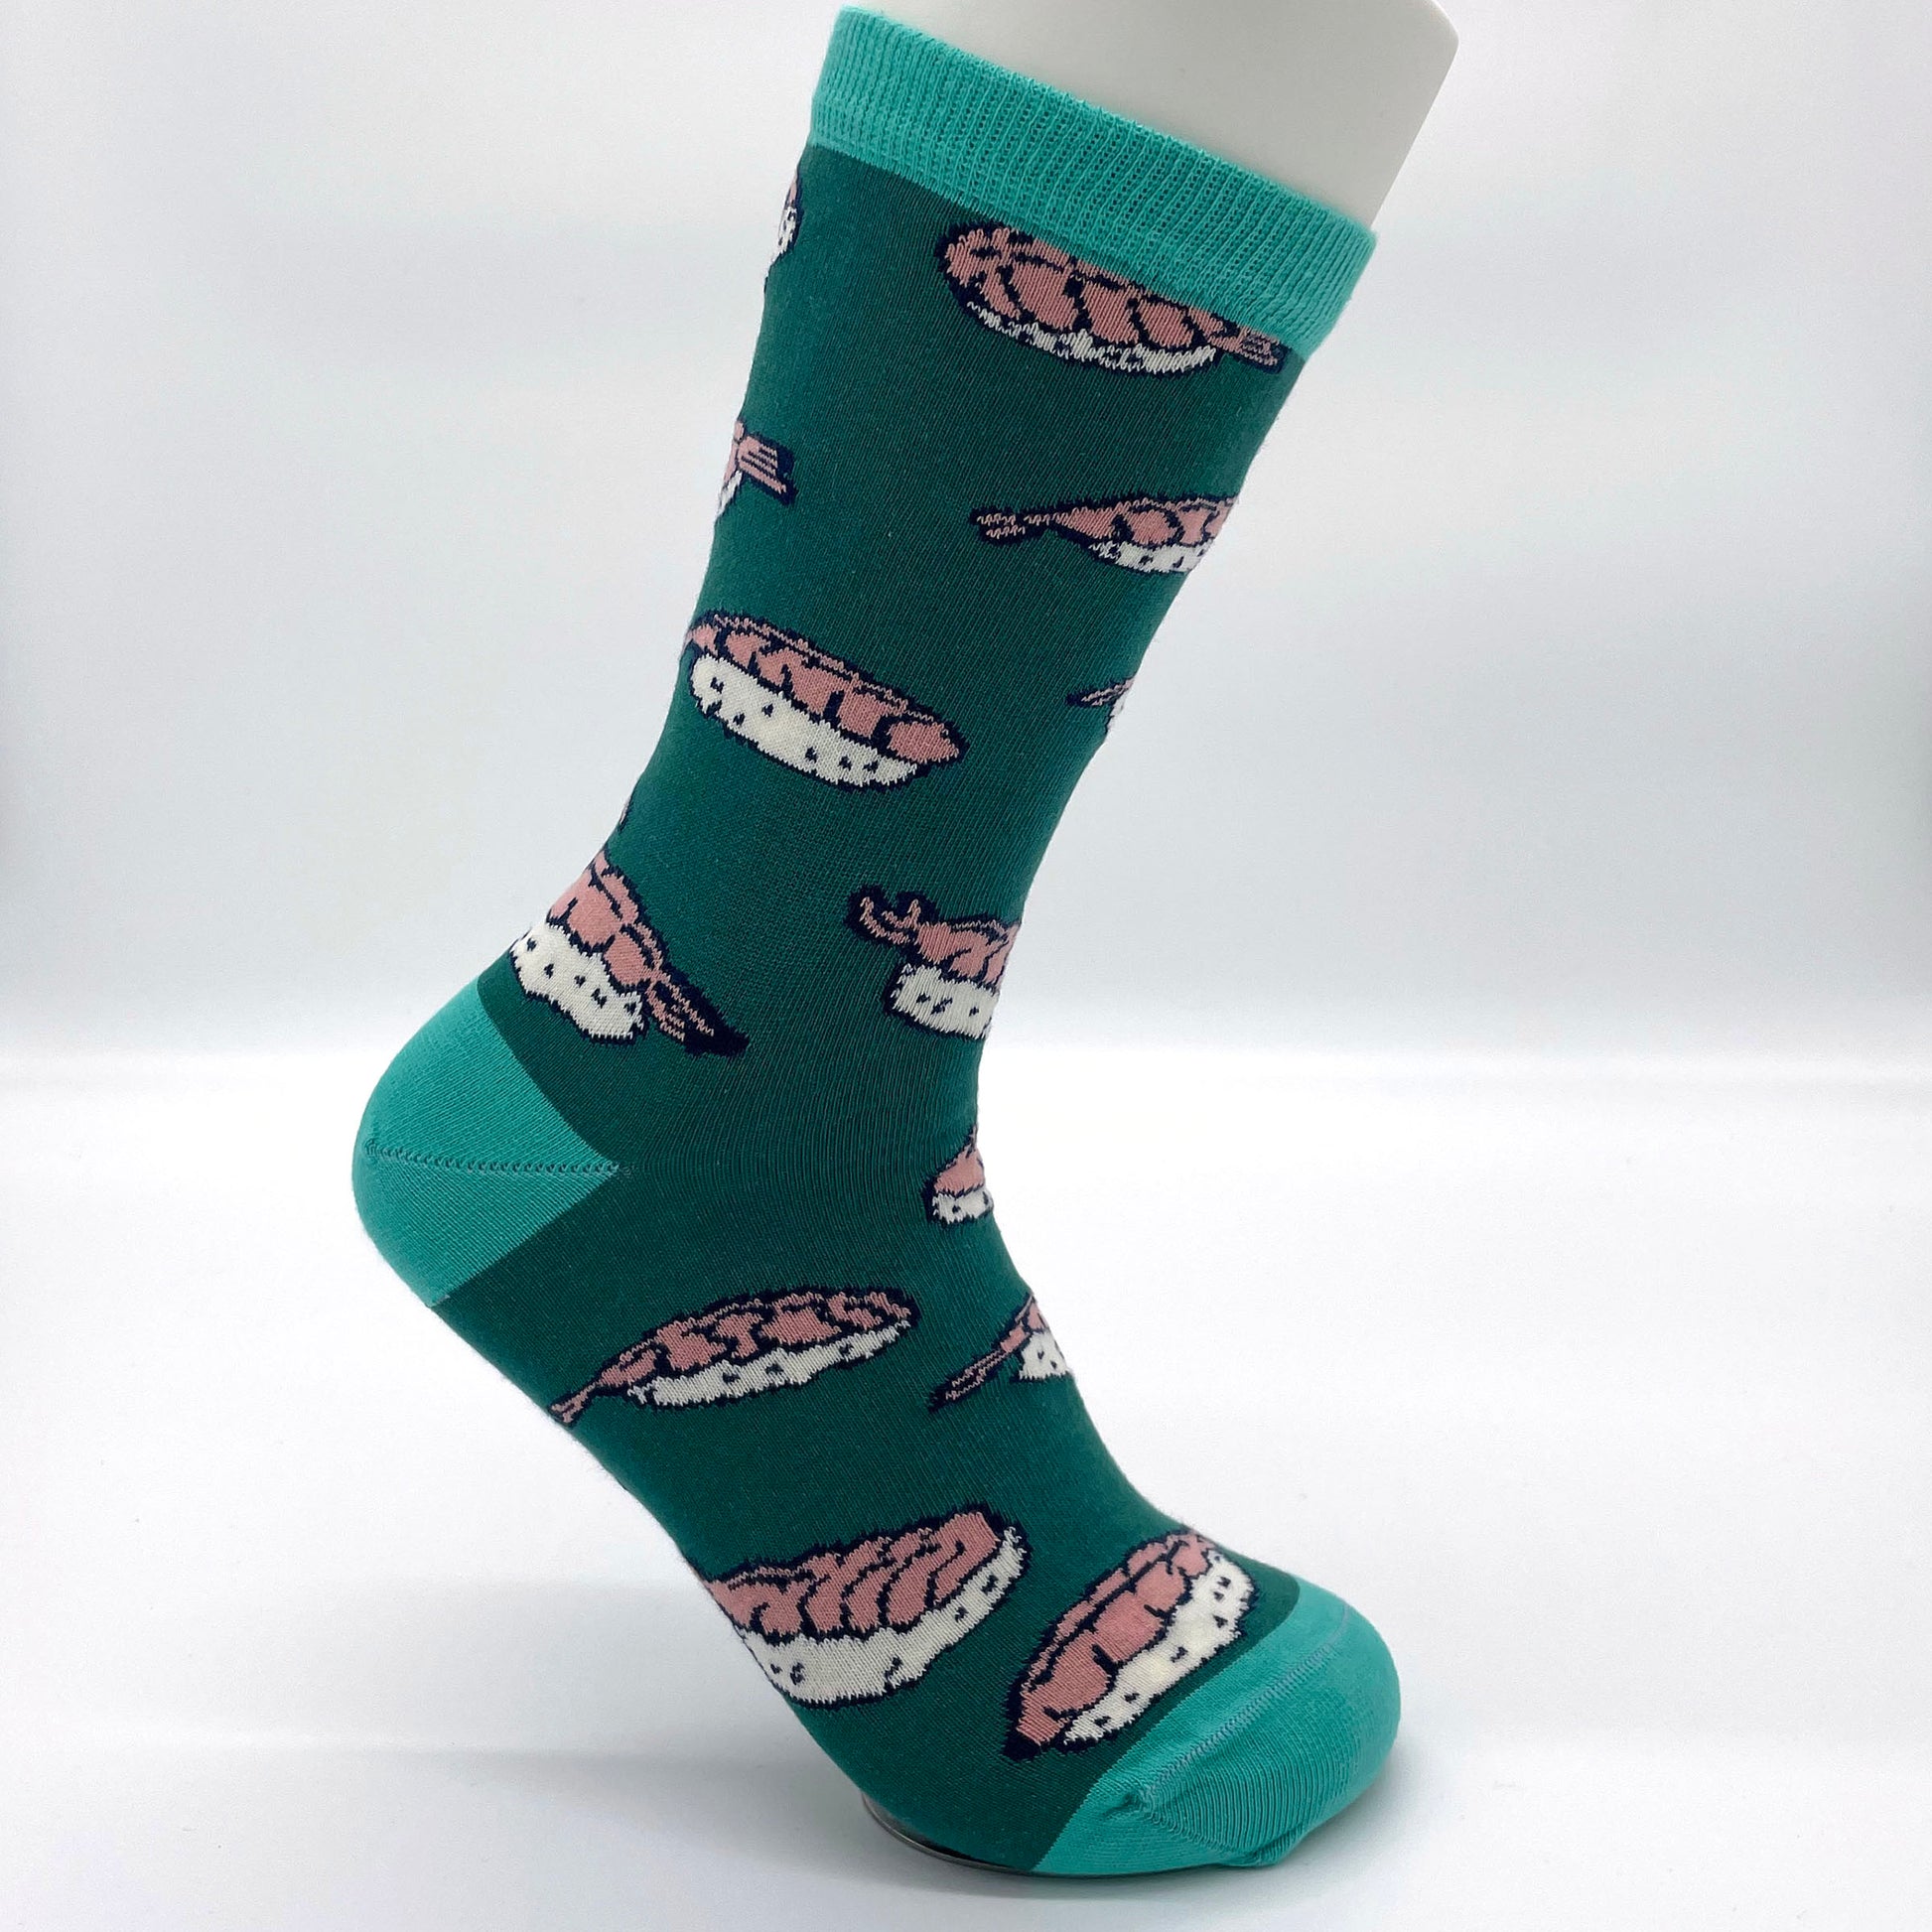 A white sock mannequin sports a teal sock patterned with shrimp nigiri. The welt, heel and toe of the sock are turquoise.